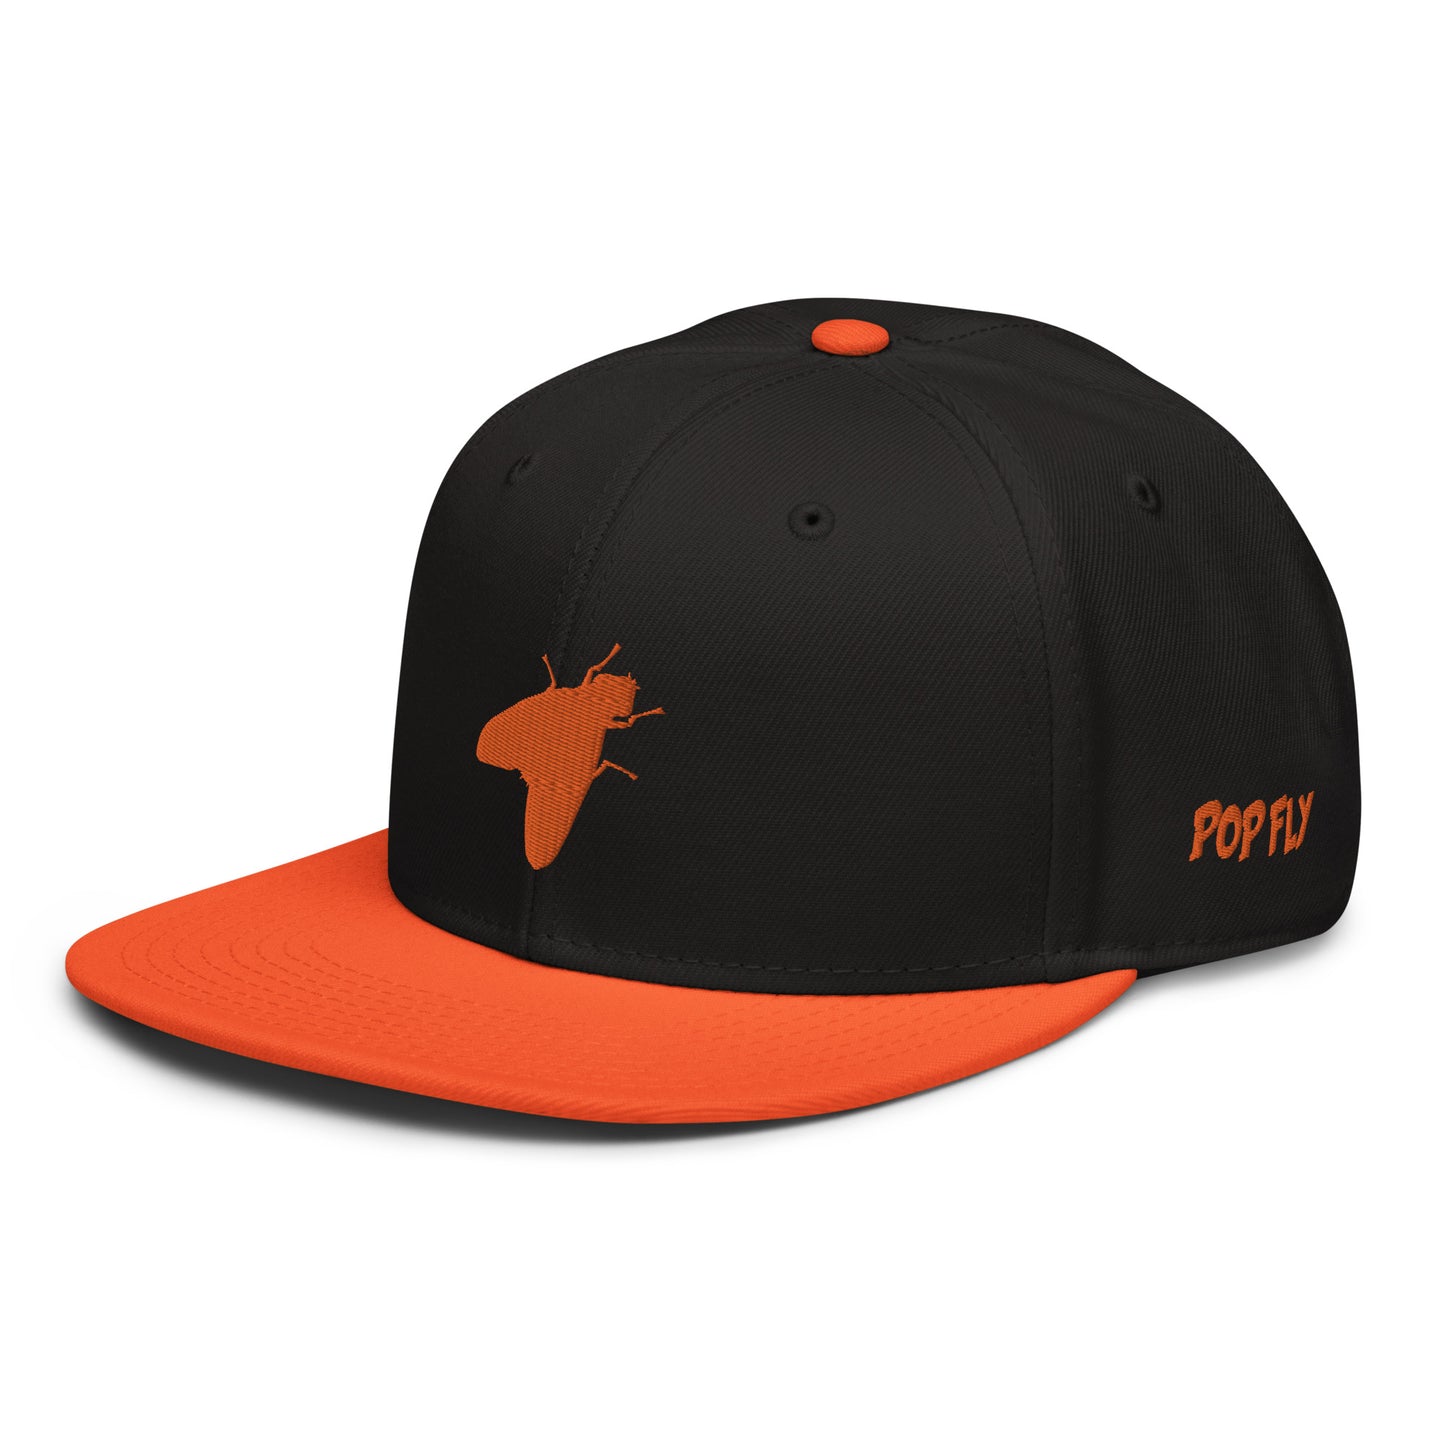 Golden City & The O's Pop Fly Hat